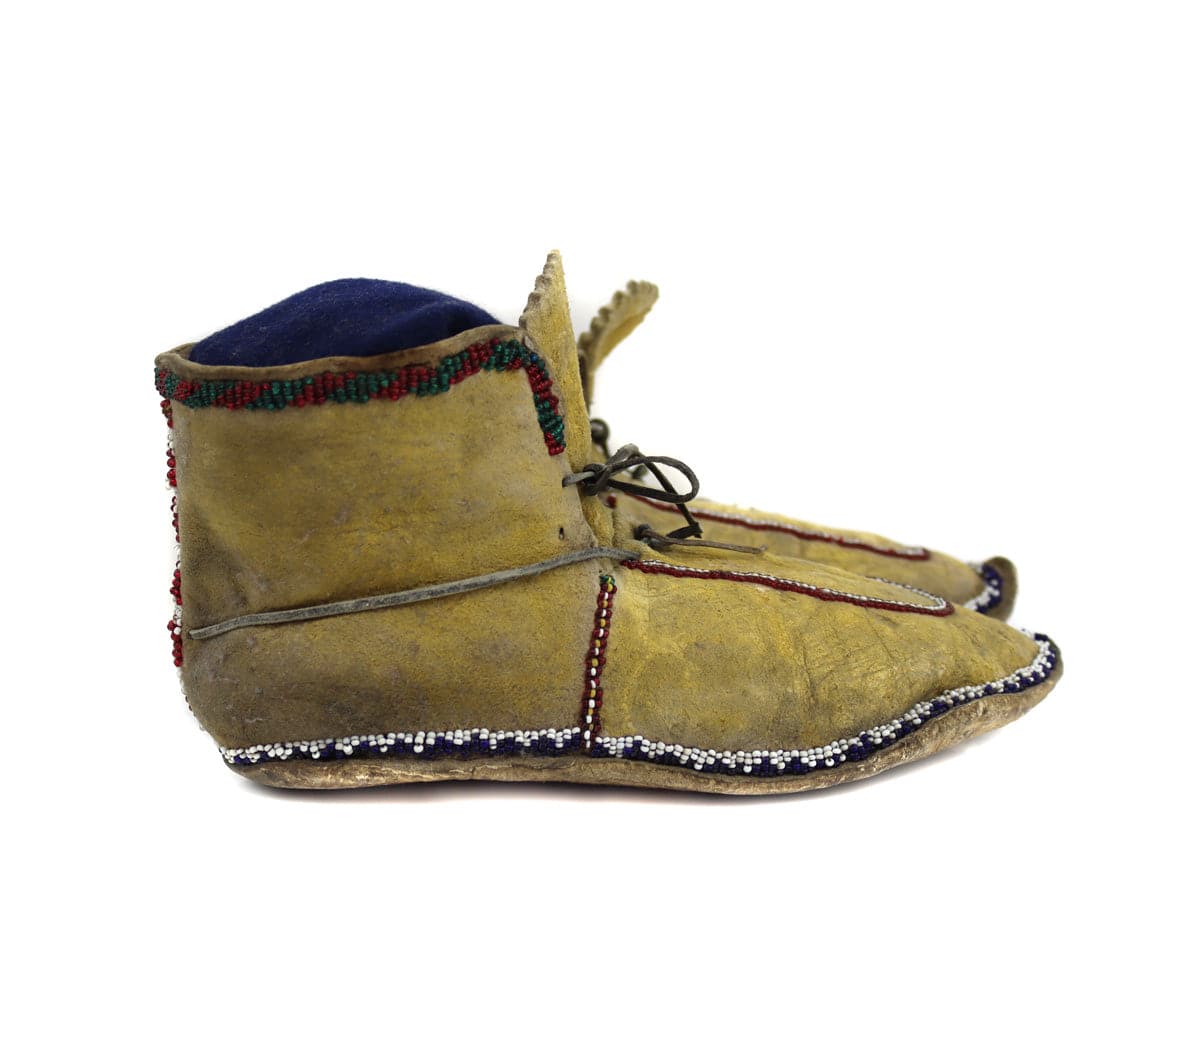 Apache Beaded Leather Moccasins c. Late 19th Century, 5" x 10" x 4" - Includes Custom Stand (DW90354B-0123-004) 5